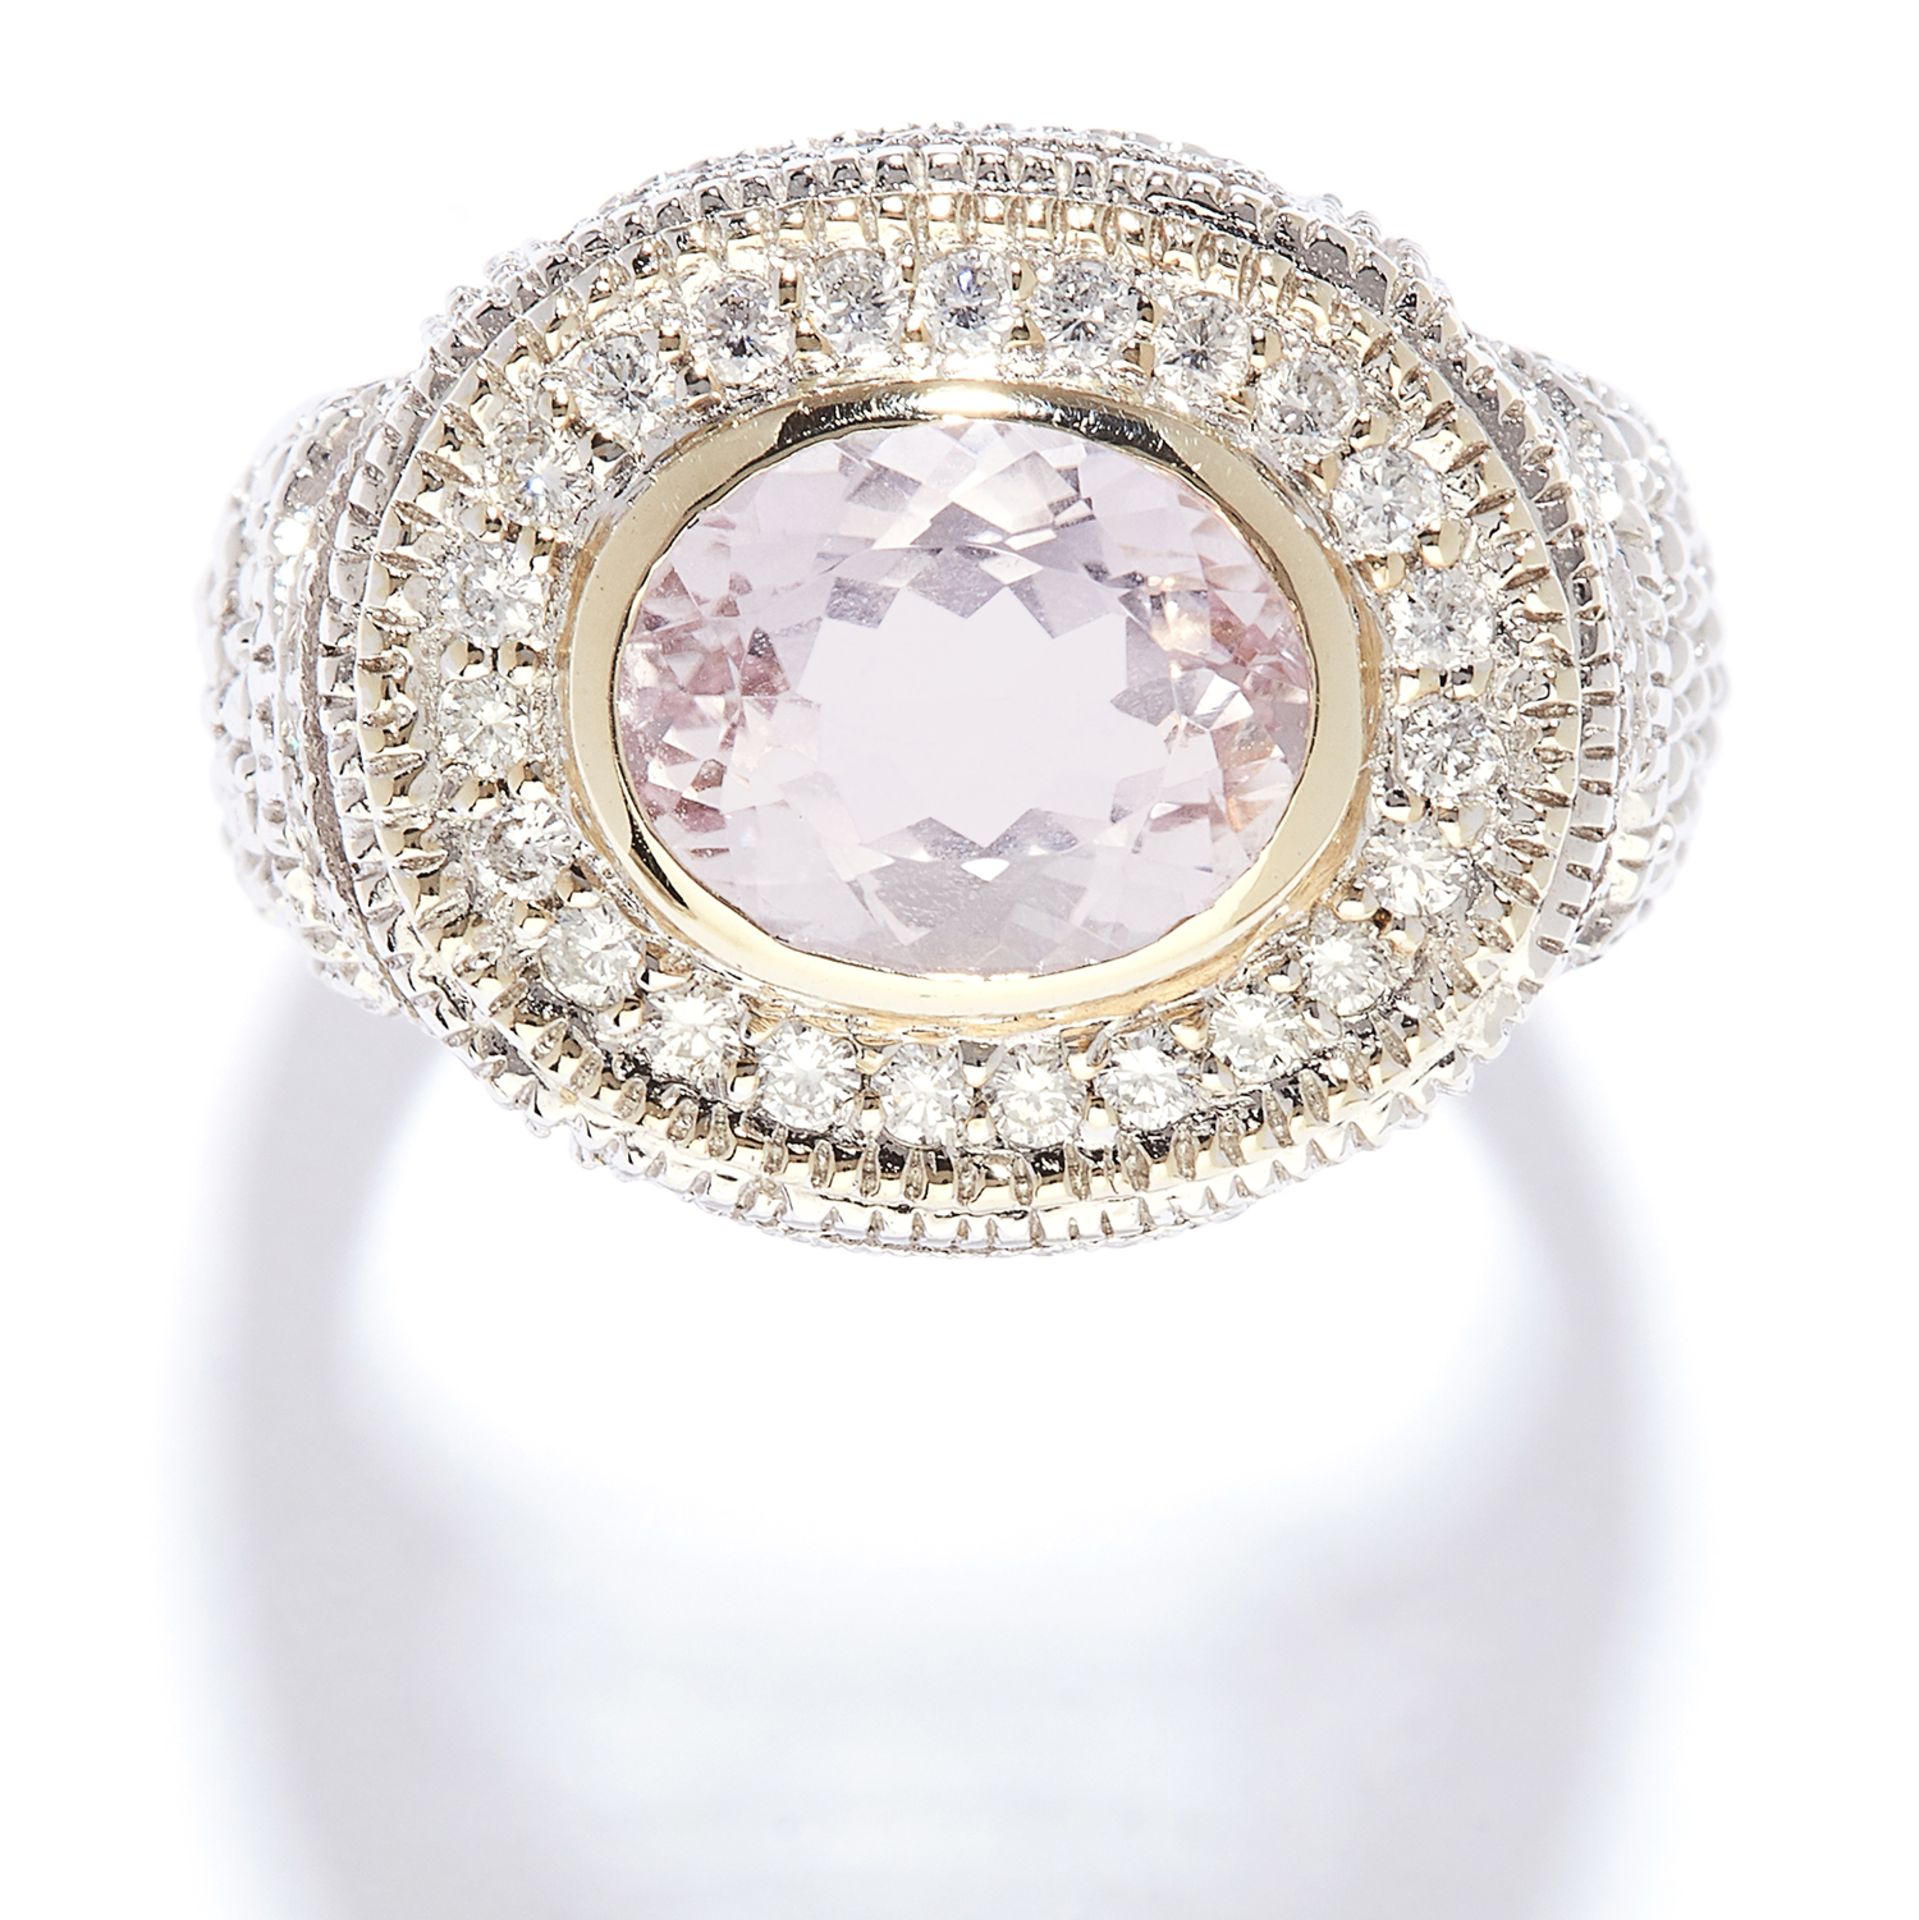 KUNZITE AND DIAMOND RING in white gold, the 2.45 carat oval cut kunzite accented by borders of